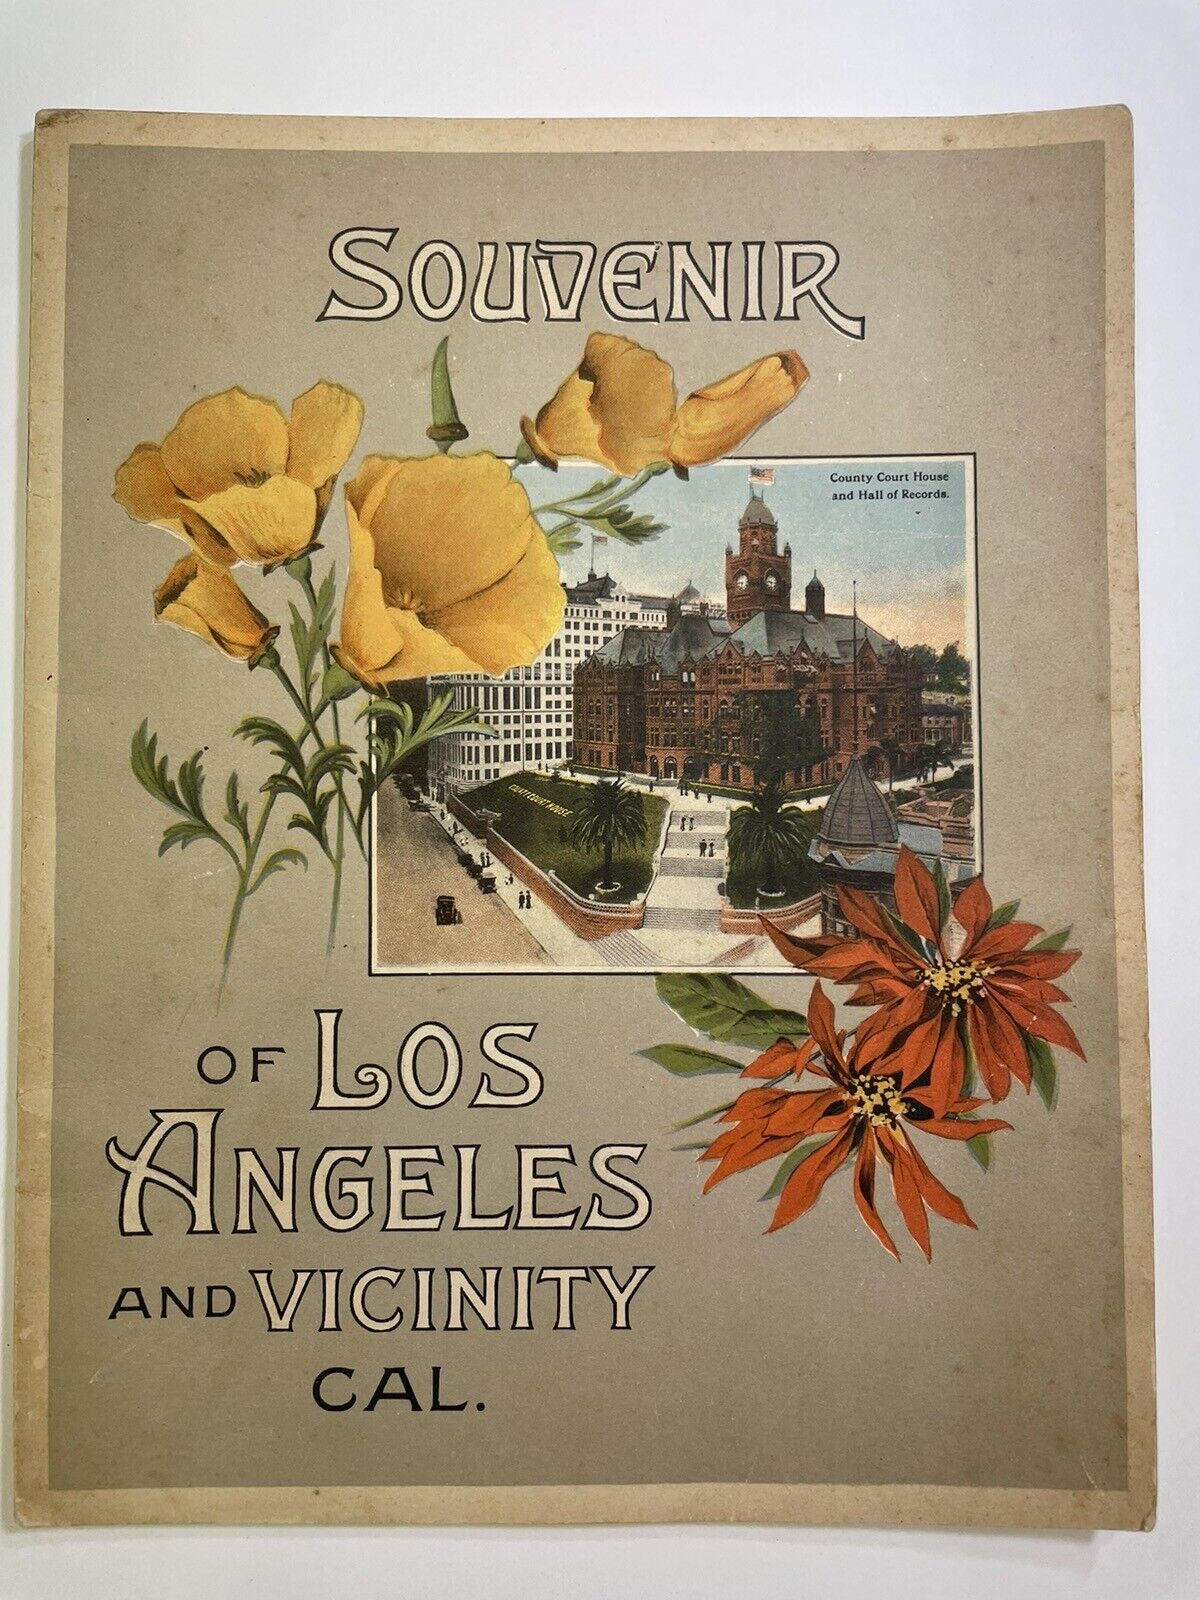 Travel paper SOUVENIR OF LOS ANGELES AND VICINITYCalifornia circa 1912 to 1920